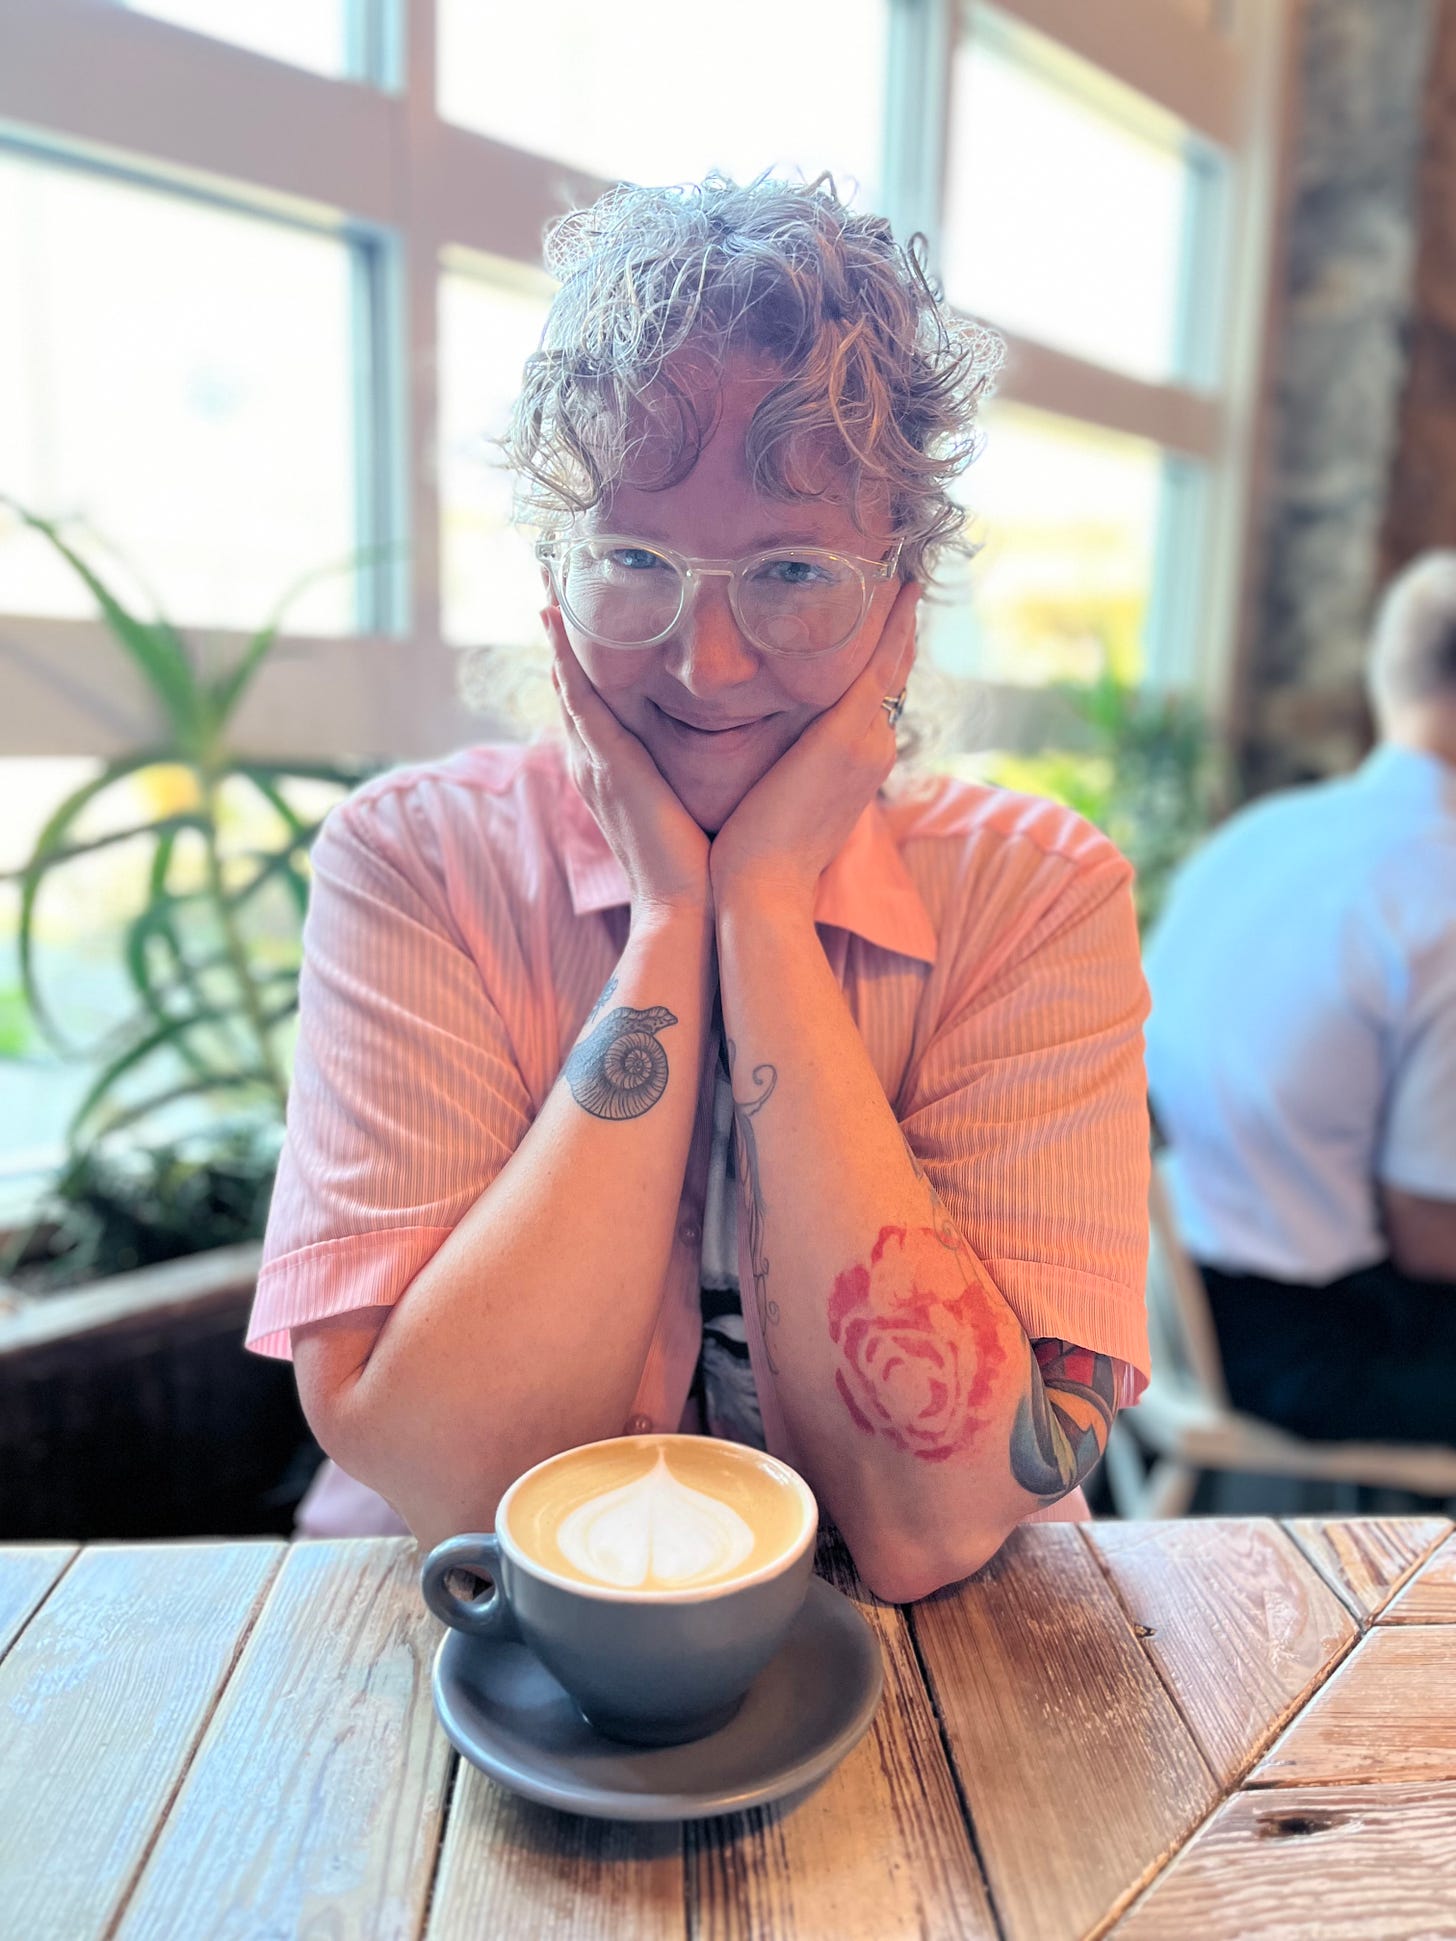 a person with curly hair wearing a light pink button-up gazes at the camera smiling, chin resting in their hands, tattooed arms propped on a wooden table with a latte on it in a sunlit cafe